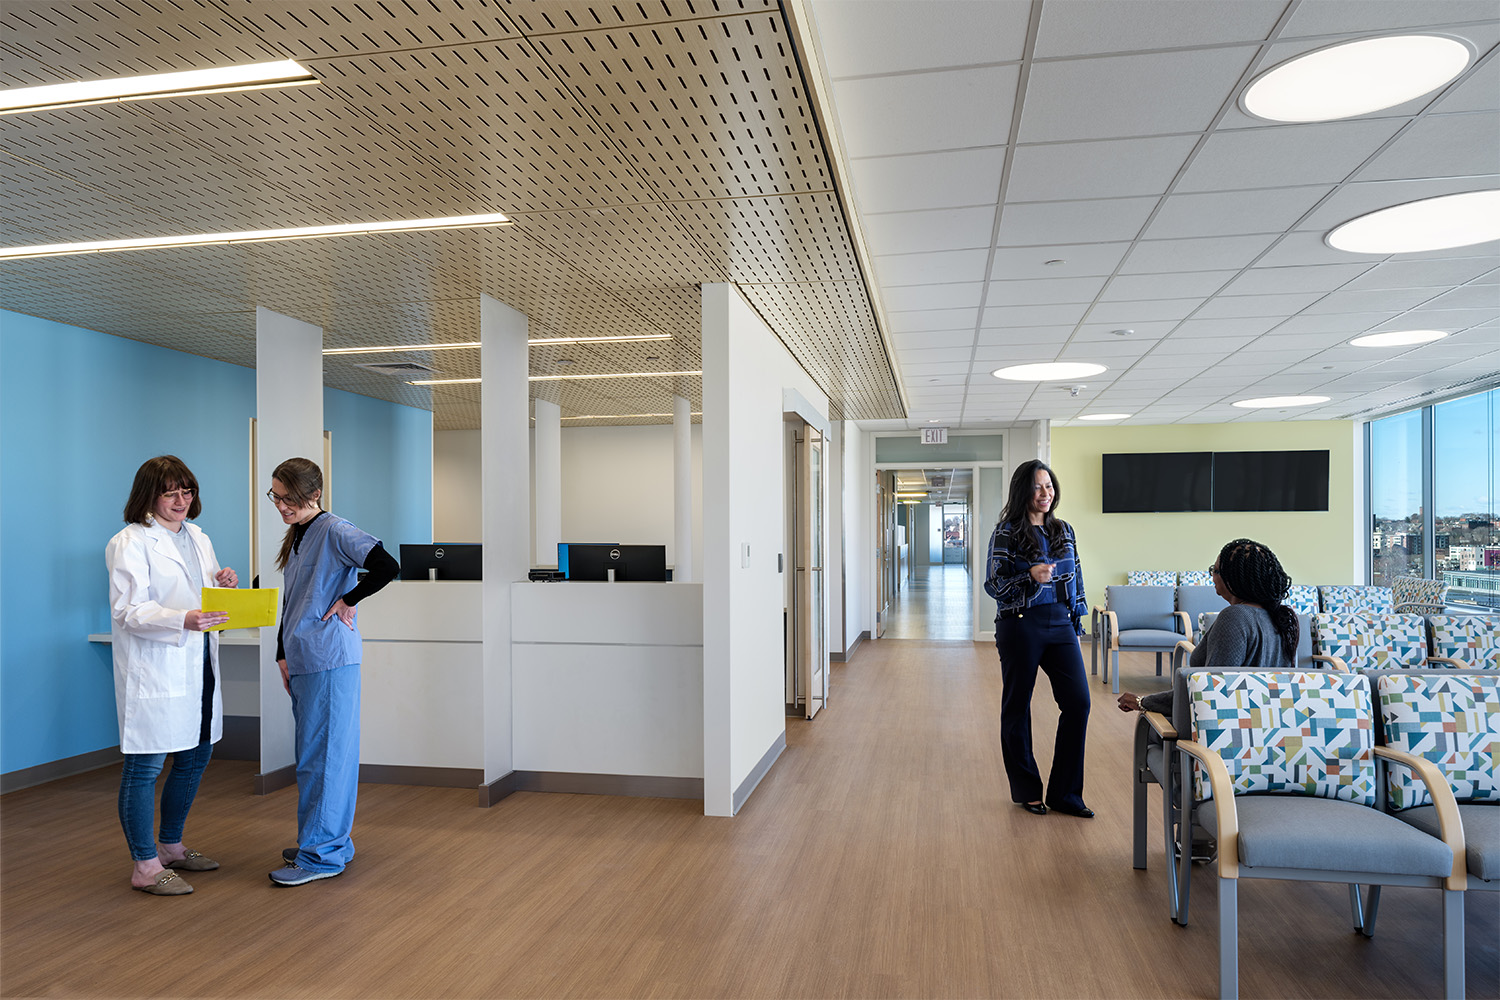 Outpatient pediatrics hospital floor, with a nurse and doctor in discussion near the front desk
